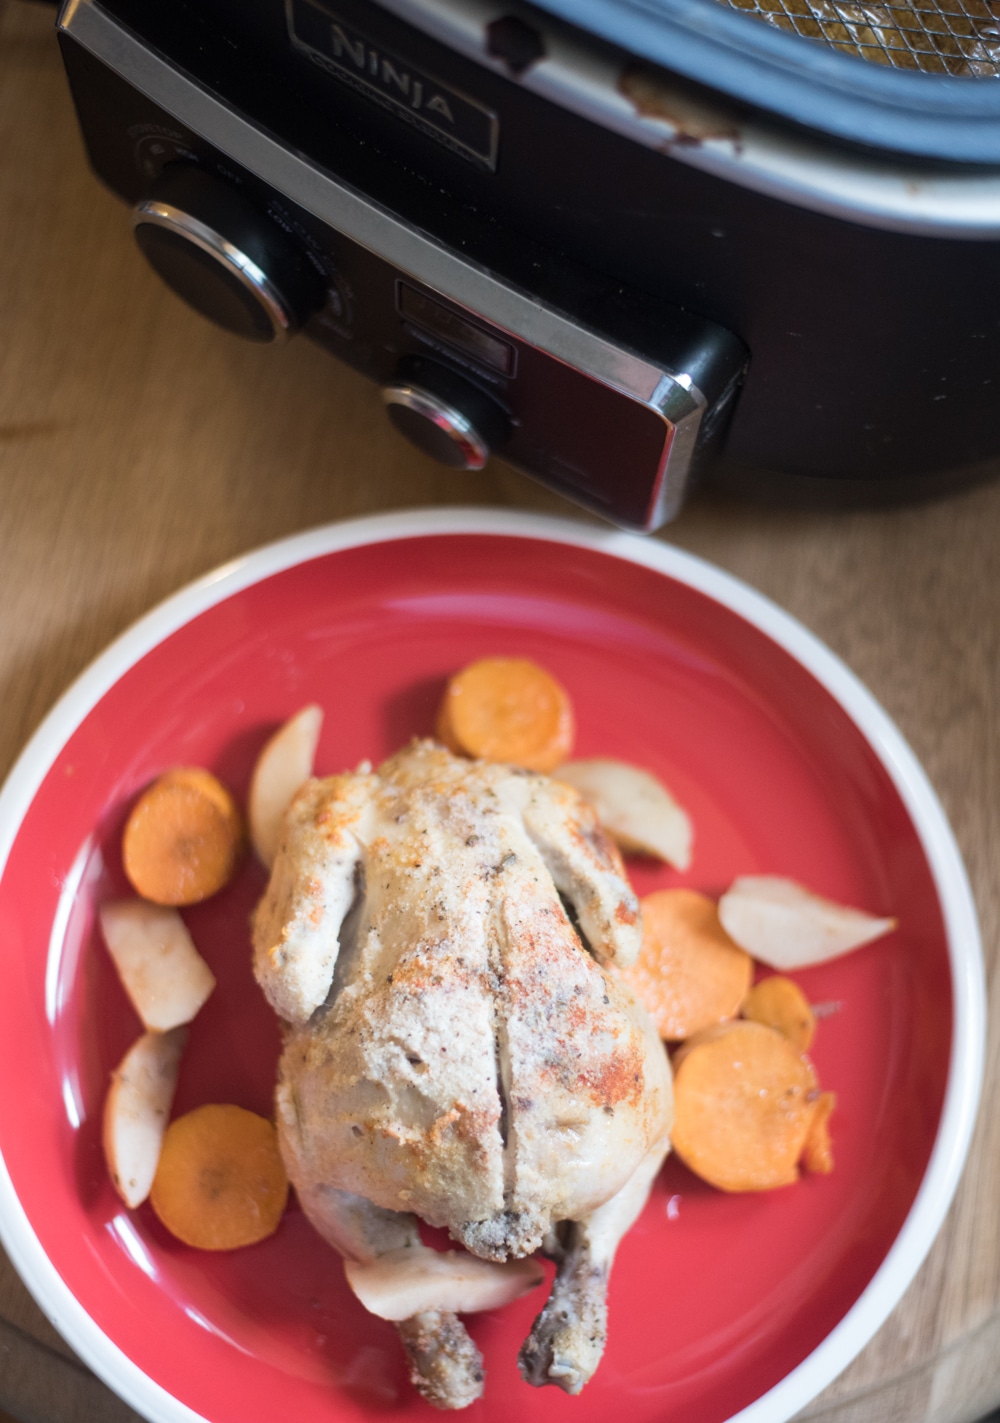 A plate of food on a table, with Slow cooker and Chicken